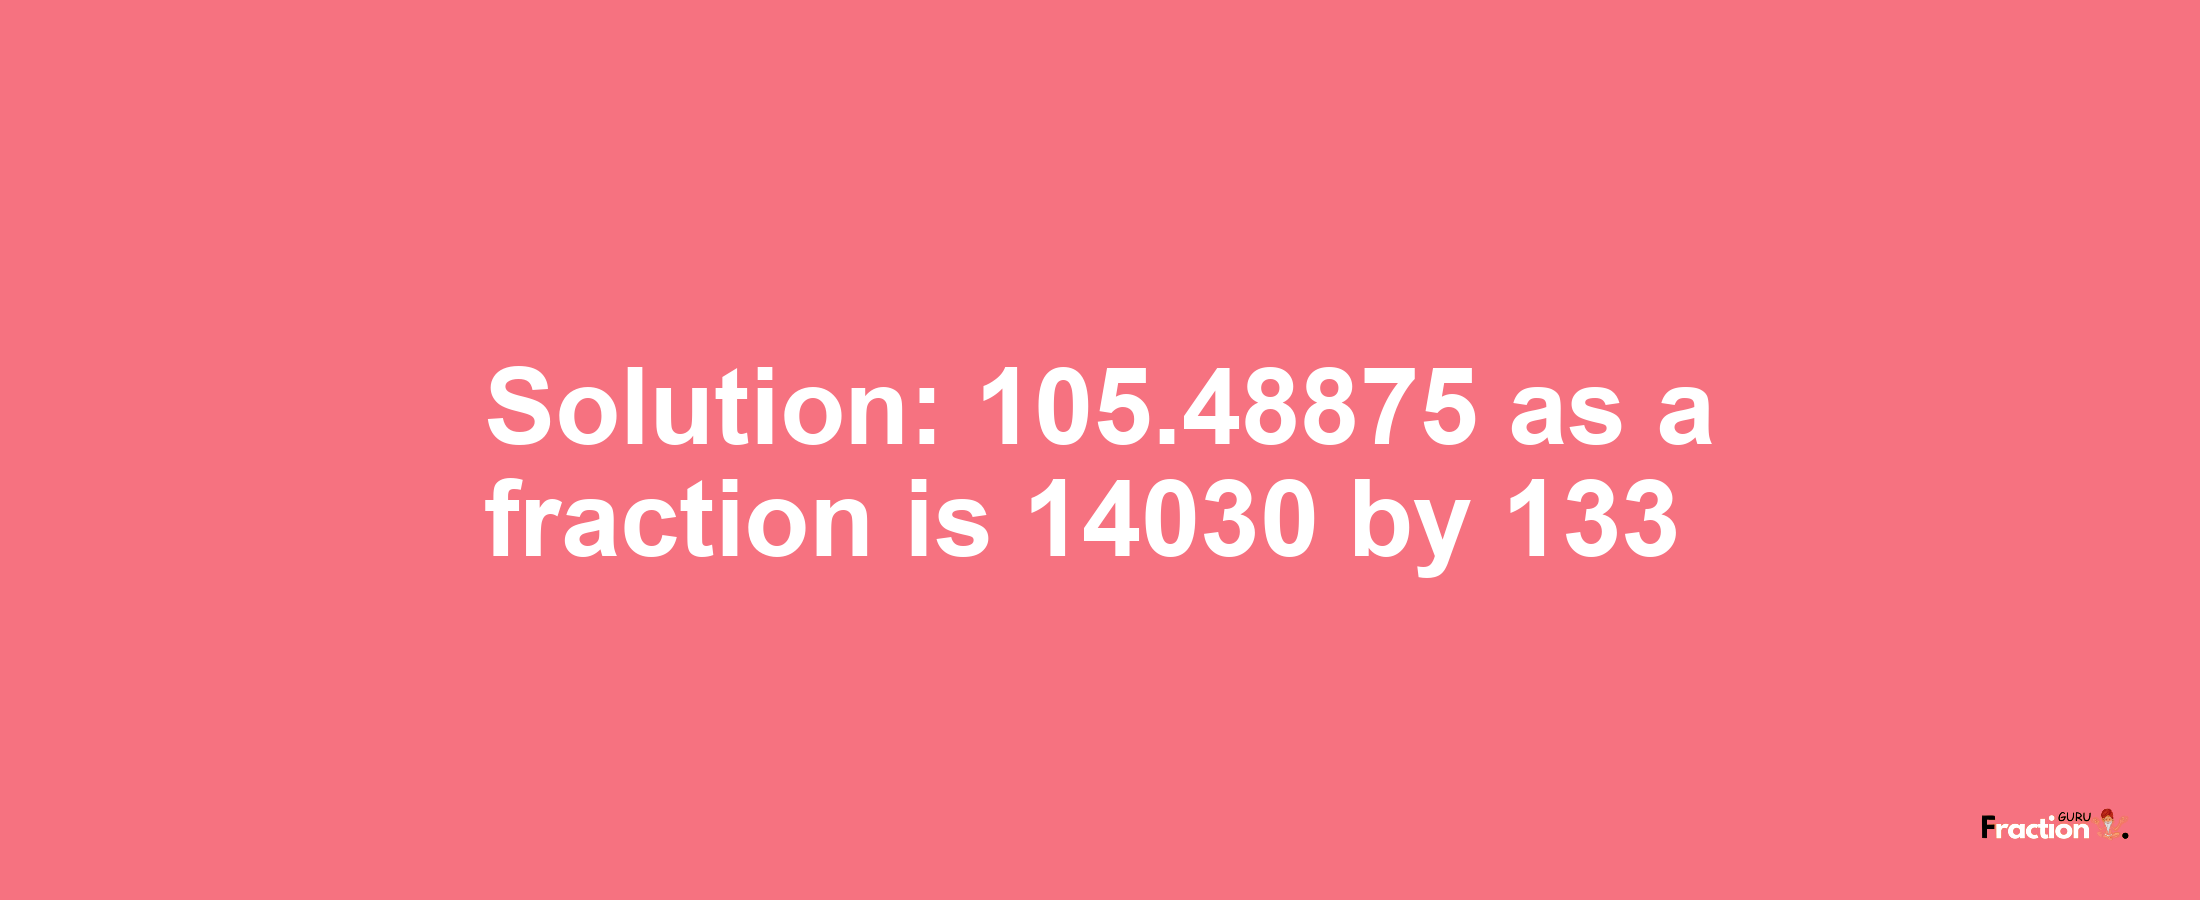 Solution:105.48875 as a fraction is 14030/133